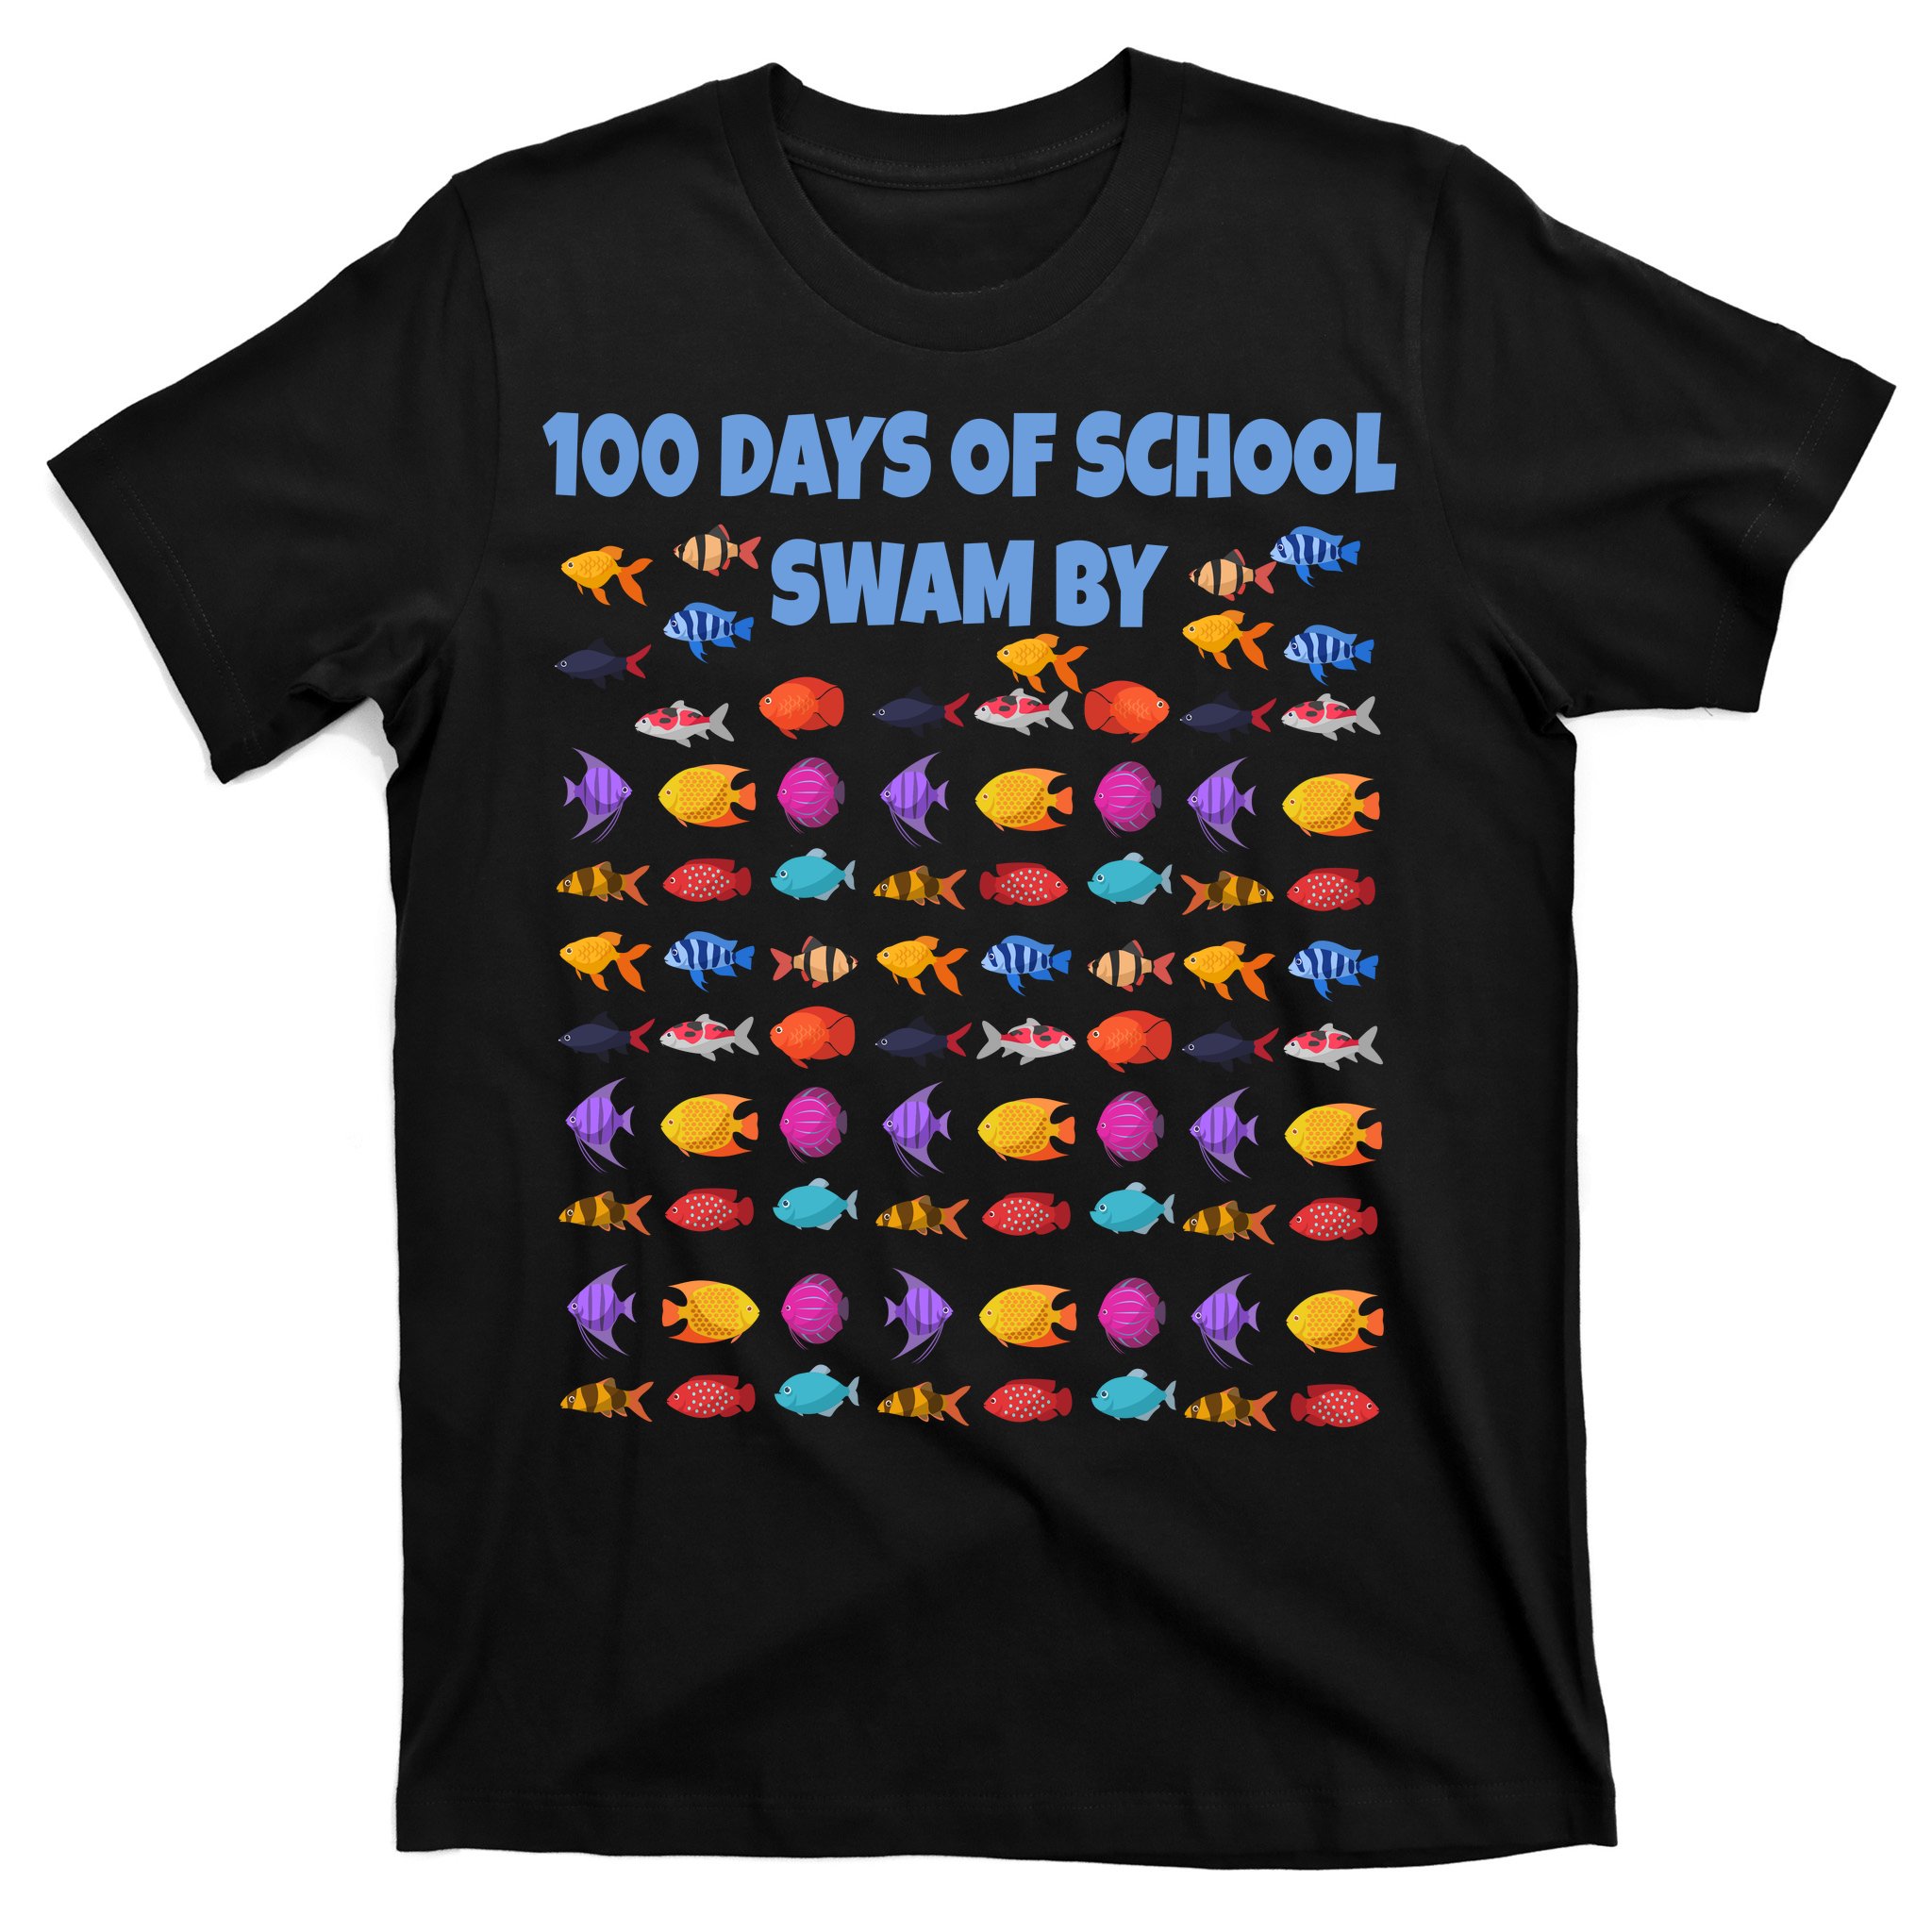 100 Days of School Swam by Fish T-Shirt